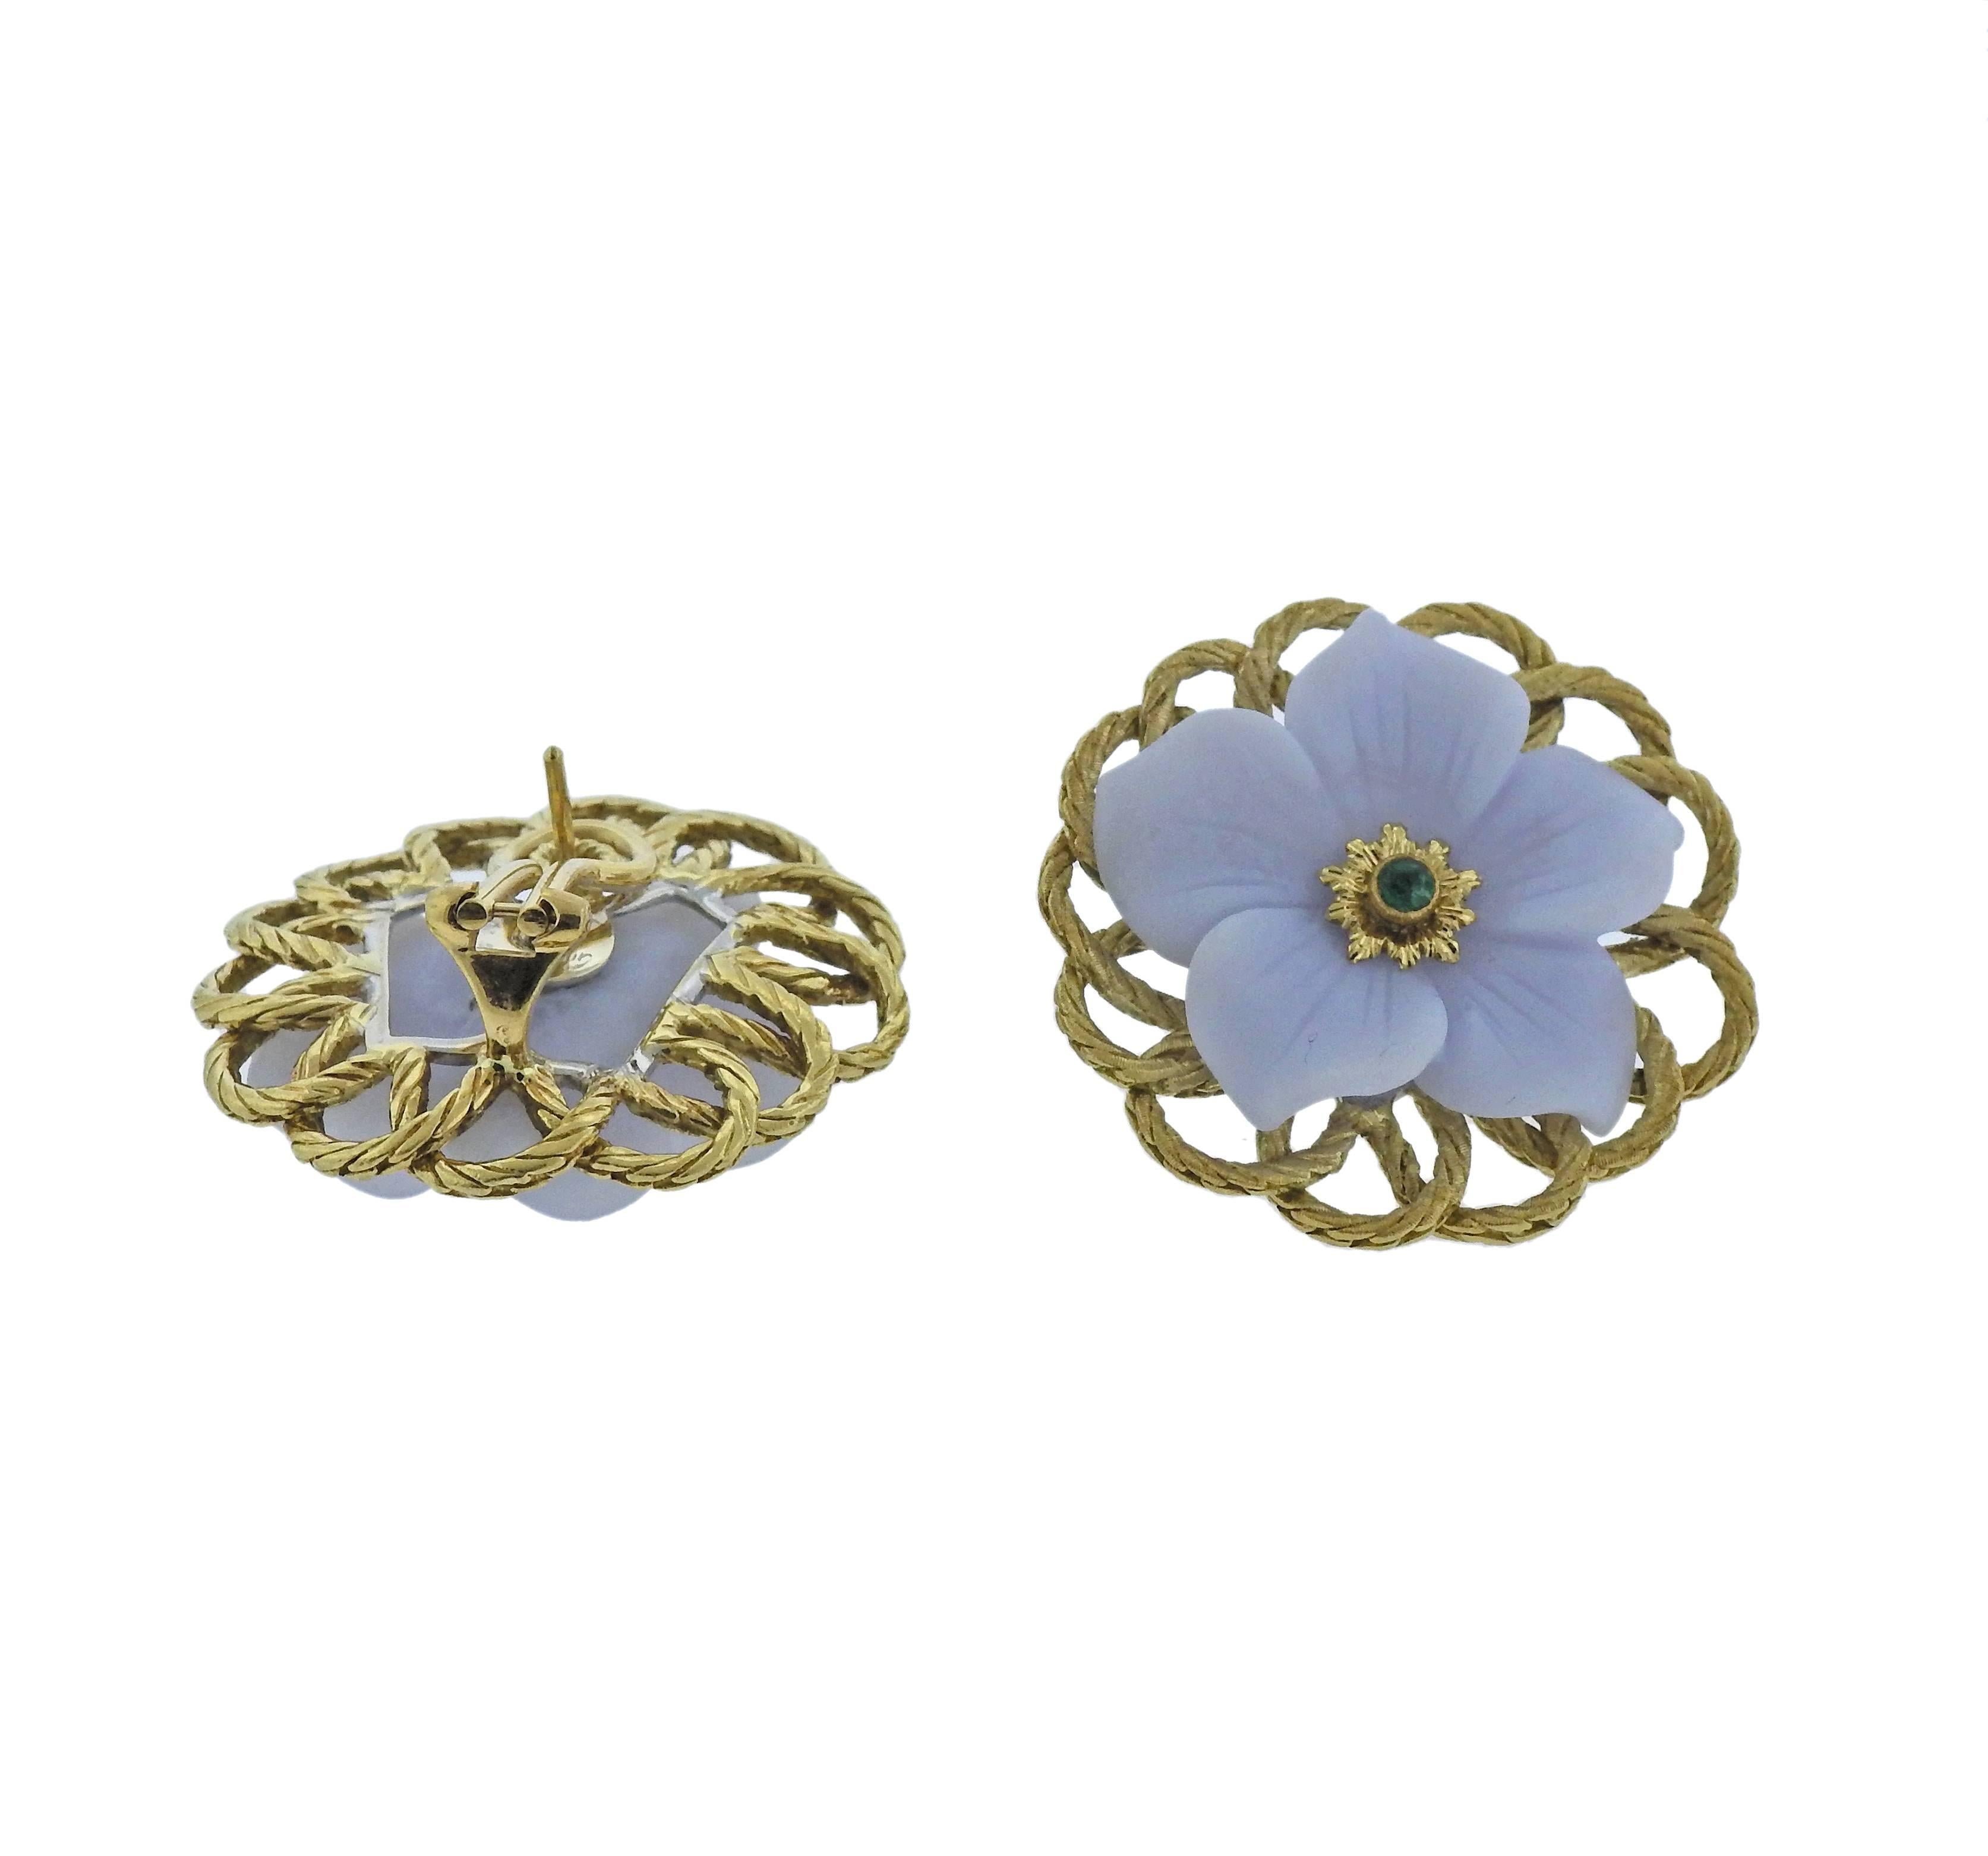 Pair of 18k gold flower earrings by Buccellati, featuring carve chalcedony petals and emerald. Retail $7300. Earrings are 31mm in diameter, weigh 24.6 grams. Marked: Gianmaria Buccellati , 750. 